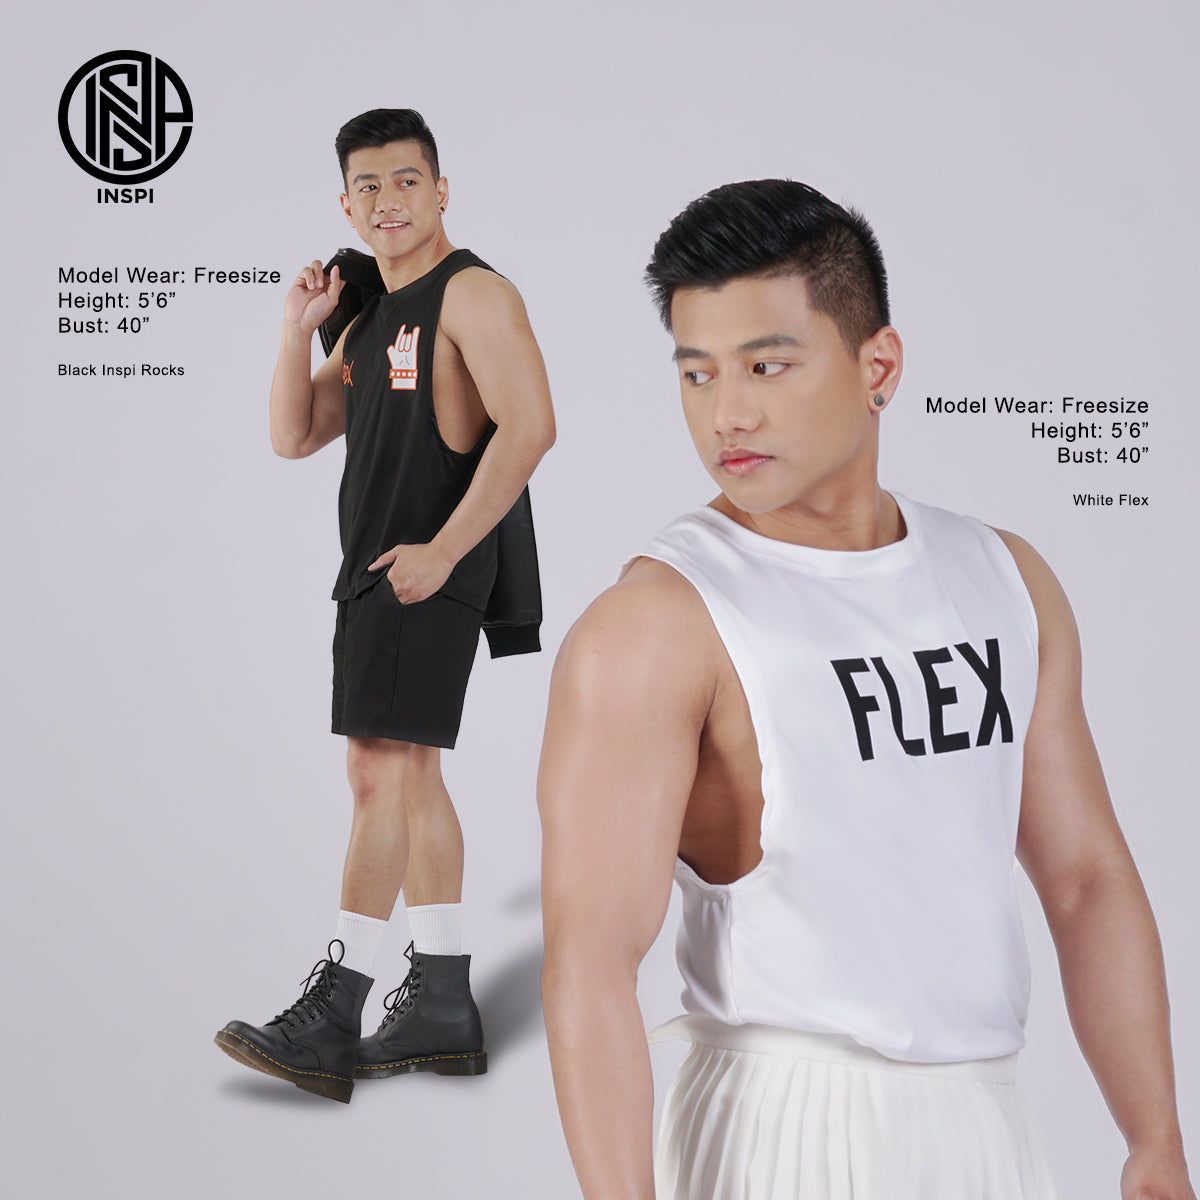 INSPI x Vrix Muscle Tee For Men Printed Sleeveless Tank Top Sando Minimalist Inspired Activewear Mens Gym Clothes